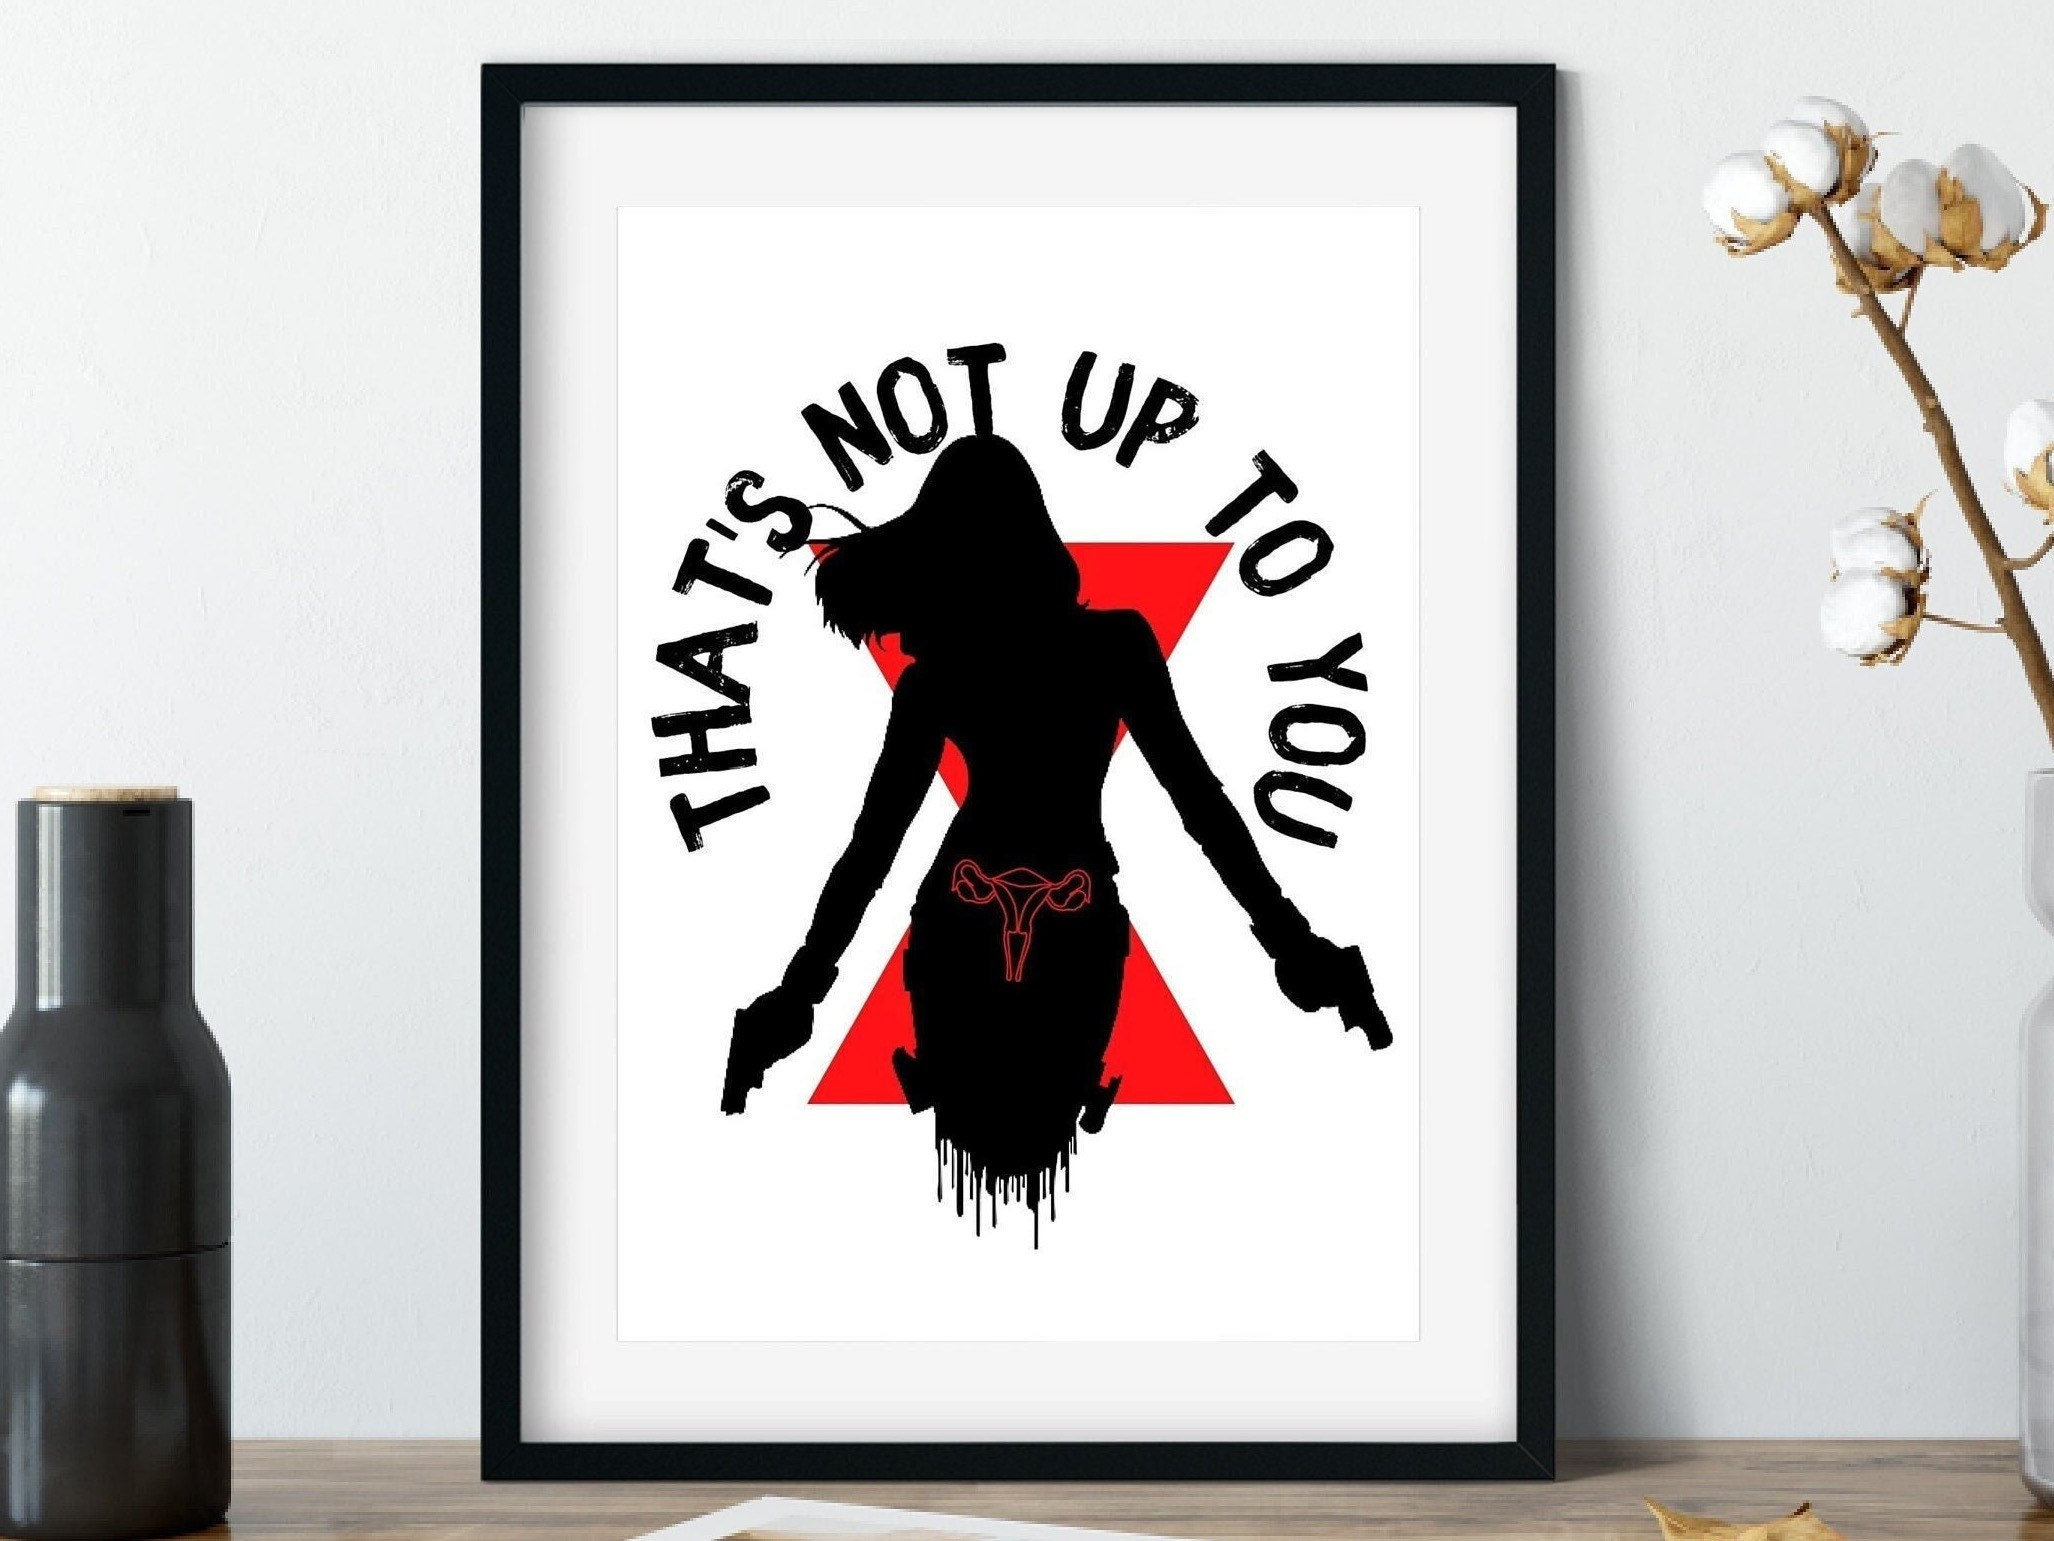 Black Widow Pro Choice Printable, Roe v Wade Poster, My Body My Choice, Women's Rights